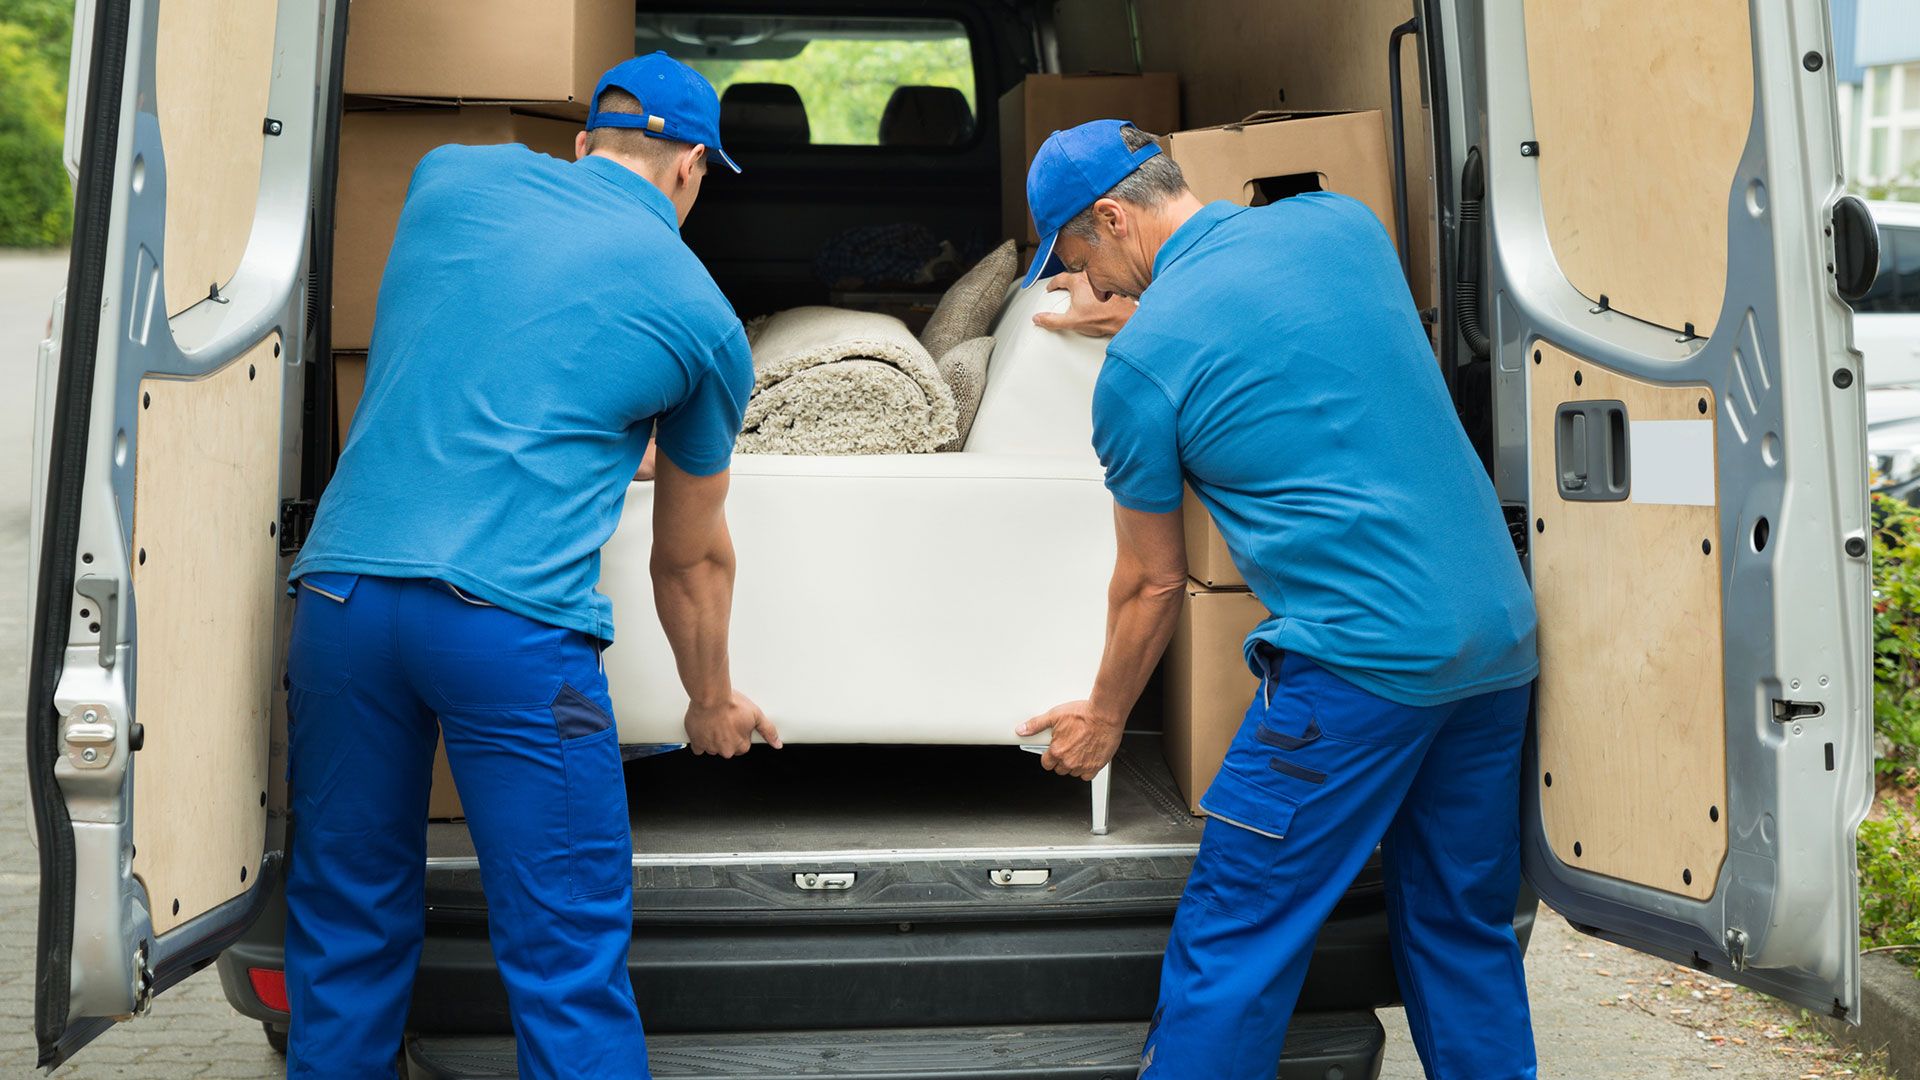 Furniture Delivery Services West Palm Beach FL